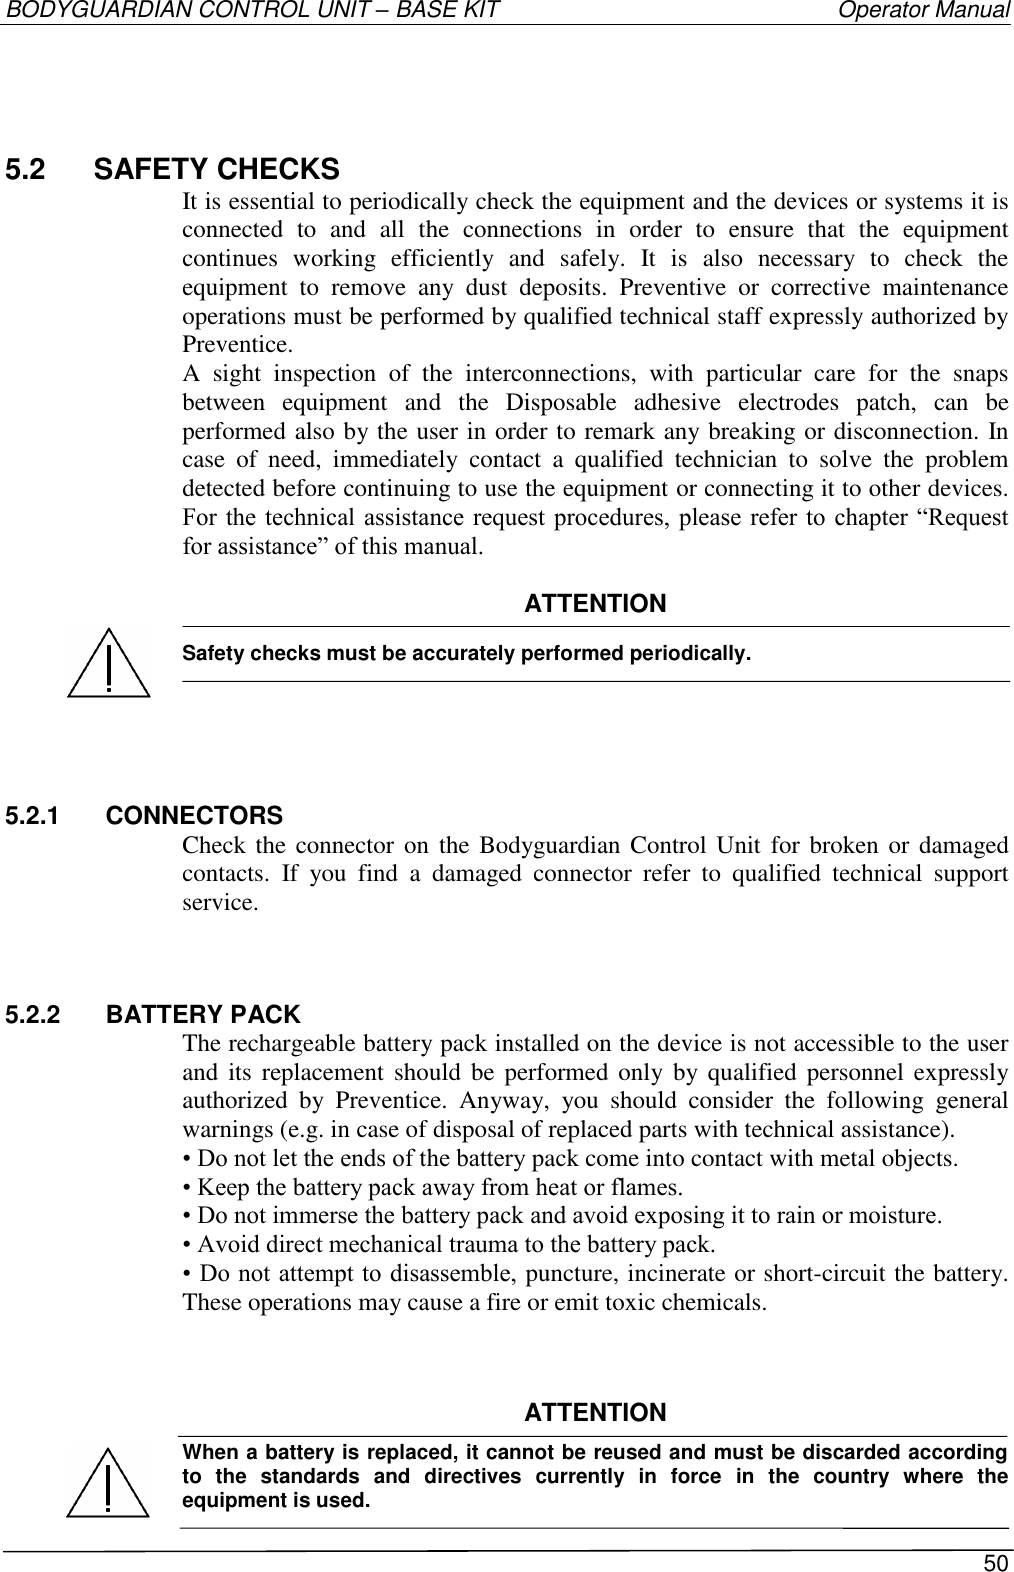 BODYGUARDIAN CONTROL UNIT – BASE KIT   Operator Manual 50  5.2  SAFETY CHECKS It is essential to periodically check the equipment and the devices or systems it is connected  to  and  all  the  connections  in  order  to  ensure  that  the  equipment continues  working  efficiently  and  safely.  It  is  also  necessary  to  check  the equipment  to  remove  any  dust  deposits.  Preventive  or  corrective  maintenance operations must be performed by qualified technical staff expressly authorized by Preventice. A  sight  inspection  of  the  interconnections,  with  particular  care  for  the  snaps between  equipment  and  the  Disposable  adhesive  electrodes  patch,  can  be performed also by the user in order to remark any breaking or disconnection. In case  of  need,  immediately  contact  a  qualified  technician  to  solve  the  problem detected before continuing to use the equipment or connecting it to other devices. For the technical assistance request procedures, please  refer  to chapter “Request for assistance” of this manual.  ATTENTION  Safety checks must be accurately performed periodically.    5.2.1  CONNECTORS Check the connector on the  Bodyguardian Control  Unit  for broken or  damaged contacts.  If  you  find  a  damaged  connector  refer  to  qualified  technical  support service. 5.2.2  BATTERY PACK The rechargeable battery pack installed on the device is not accessible to the user and its  replacement  should be  performed  only by qualified  personnel  expressly authorized  by  Preventice.  Anyway,  you  should  consider  the  following  general warnings (e.g. in case of disposal of replaced parts with technical assistance). • Do not let the ends of the battery pack come into contact with metal objects. • Keep the battery pack away from heat or flames. • Do not immerse the battery pack and avoid exposing it to rain or moisture. • Avoid direct mechanical trauma to the battery pack. • Do not attempt to disassemble, puncture, incinerate or short-circuit the battery. These operations may cause a fire or emit toxic chemicals.   ATTENTION When a battery is replaced, it cannot be reused and must be discarded according to  the  standards  and  directives  currently  in  force  in  the  country  where  the equipment is used.   